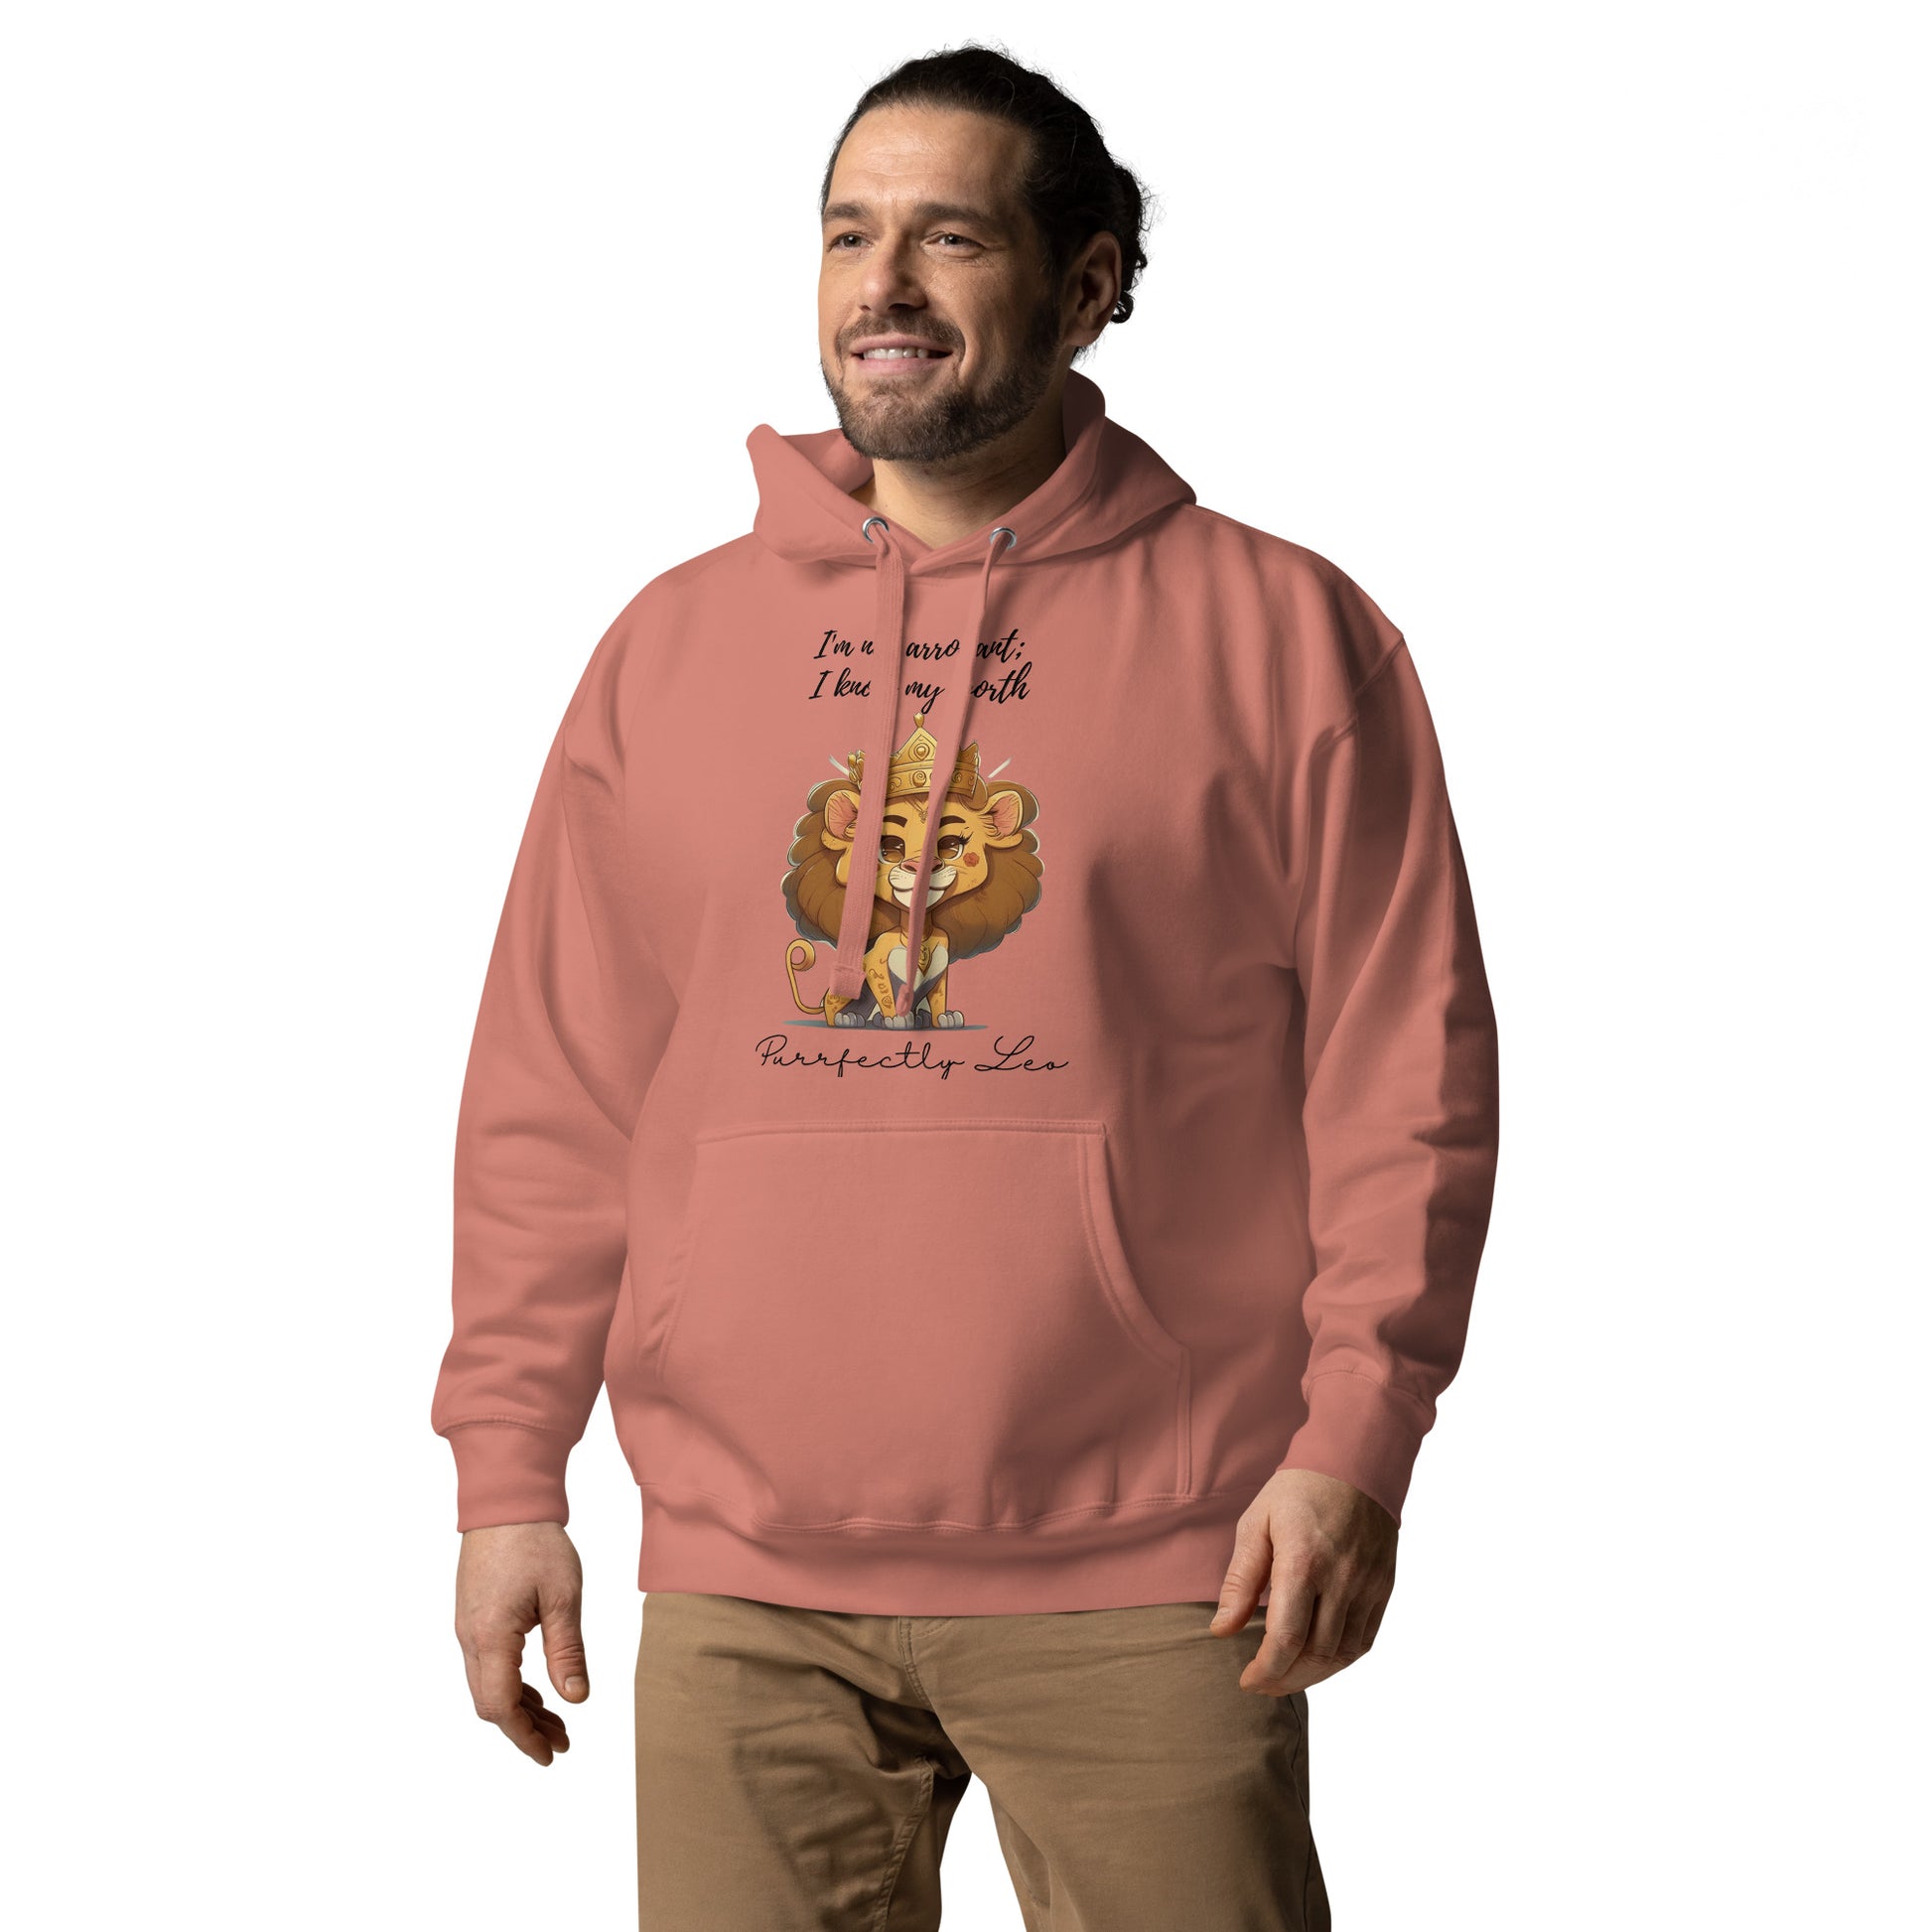  "Purrfectly Leo" Graphic Hoodie